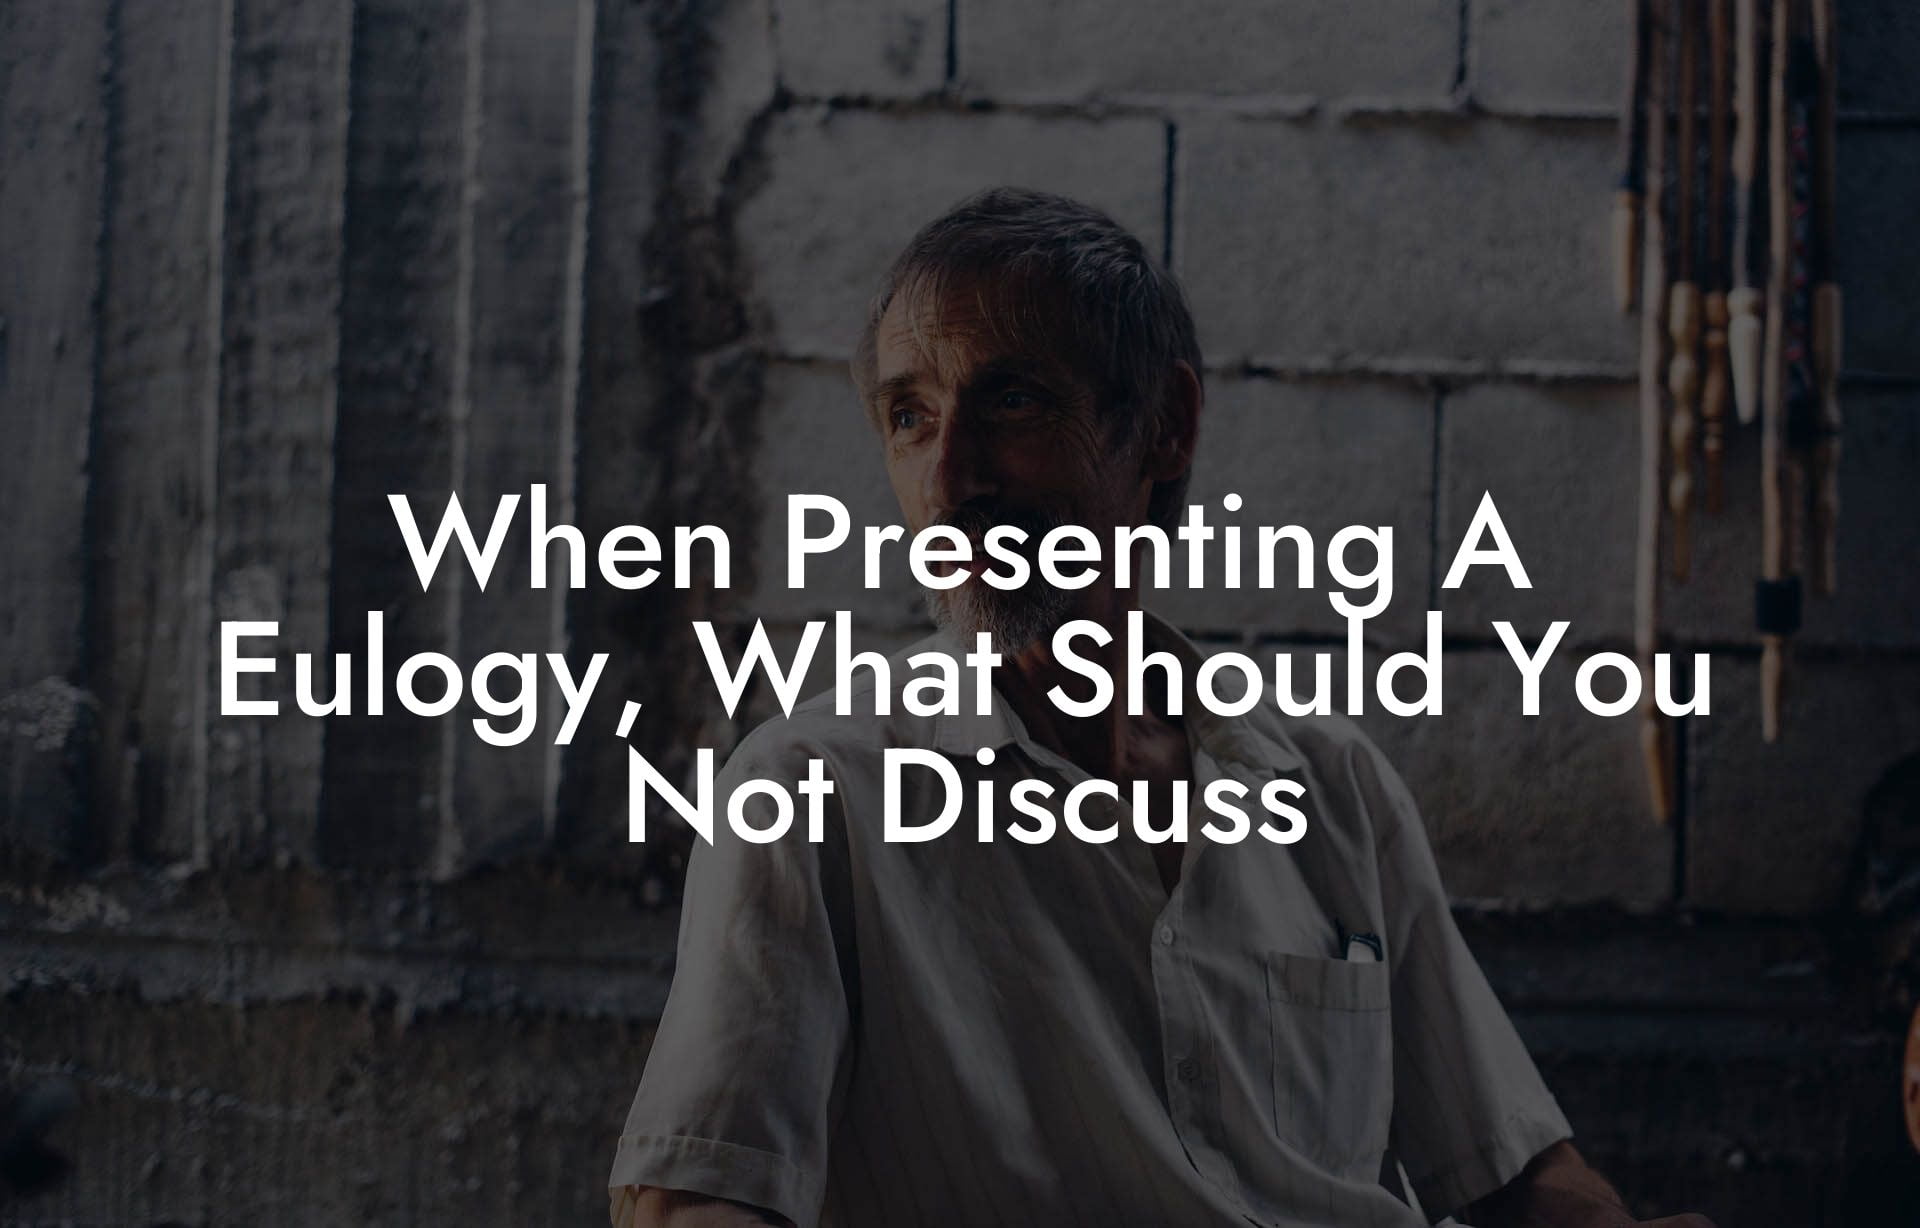 When Presenting A Eulogy, What Should You Not Discuss